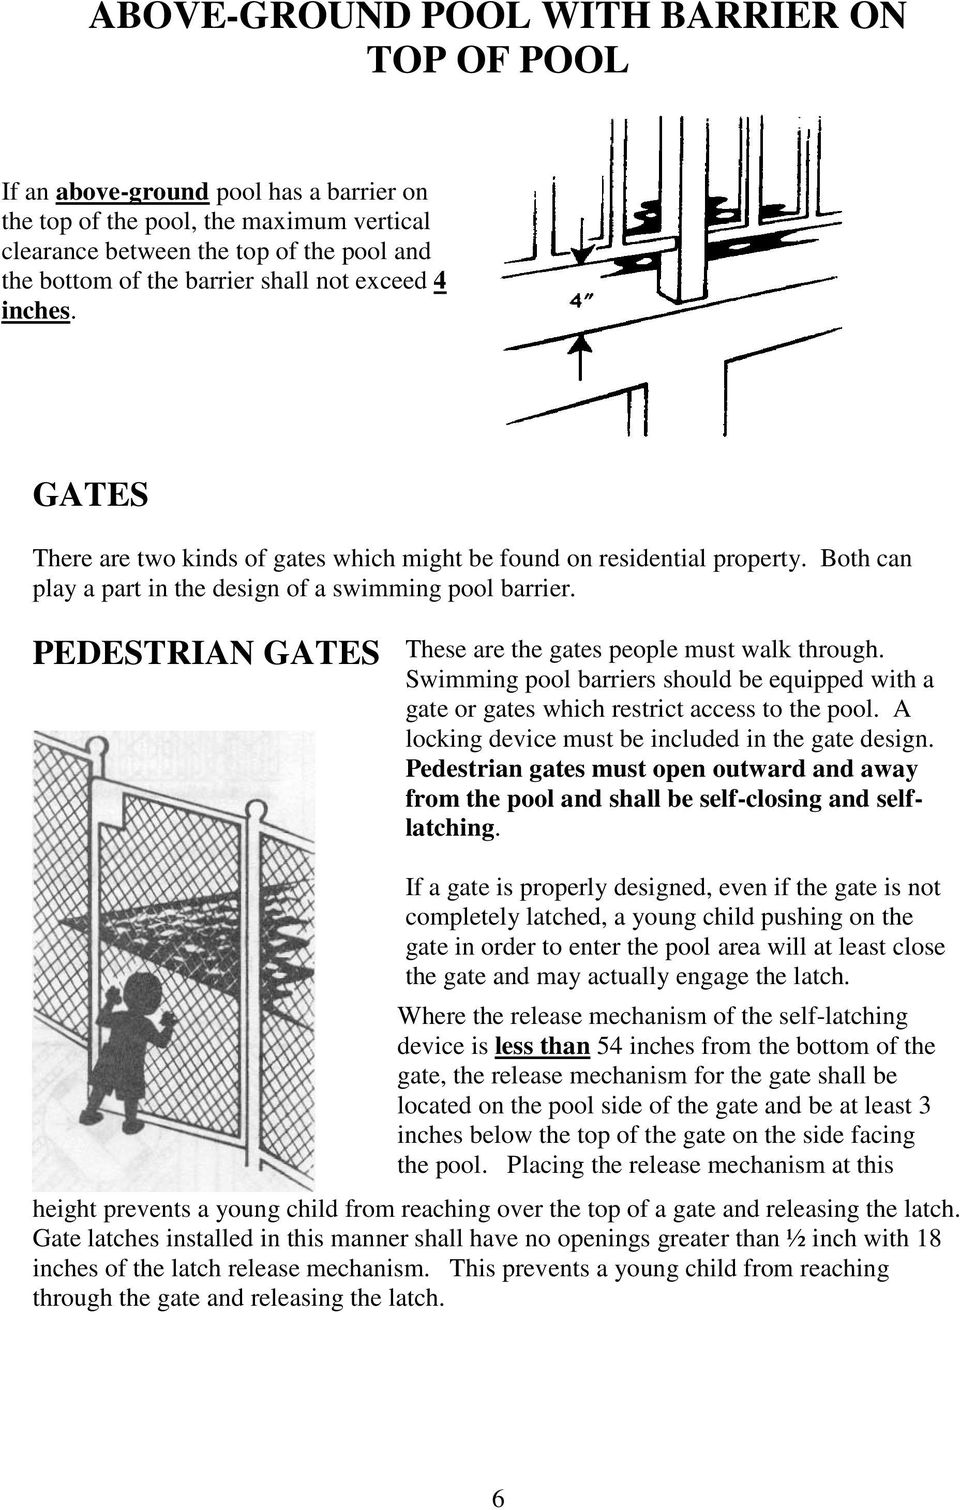 PEDESTRIAN GATES These are the gates people must walk through. Swimming pool barriers should be equipped with a gate or gates which restrict access to the pool.